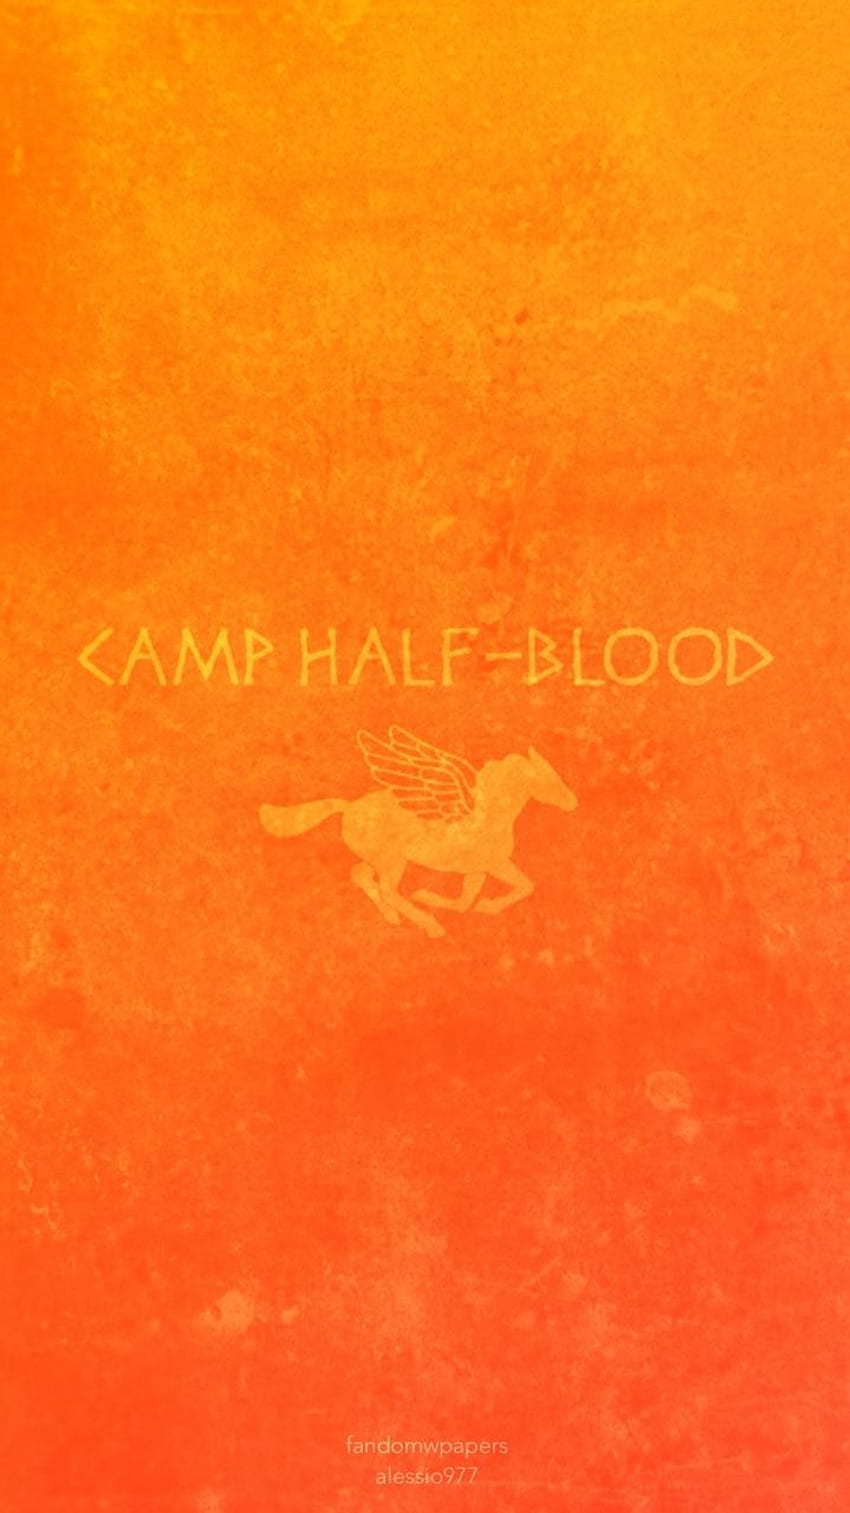 Camp Half Blood Nothingbutlooove 24 Percy Jackson [] For Your , Mobile & Tablet. Explore Camp Half Blood . Camp Half Blood , Camp Half Blood , Summer HD phone wallpaper